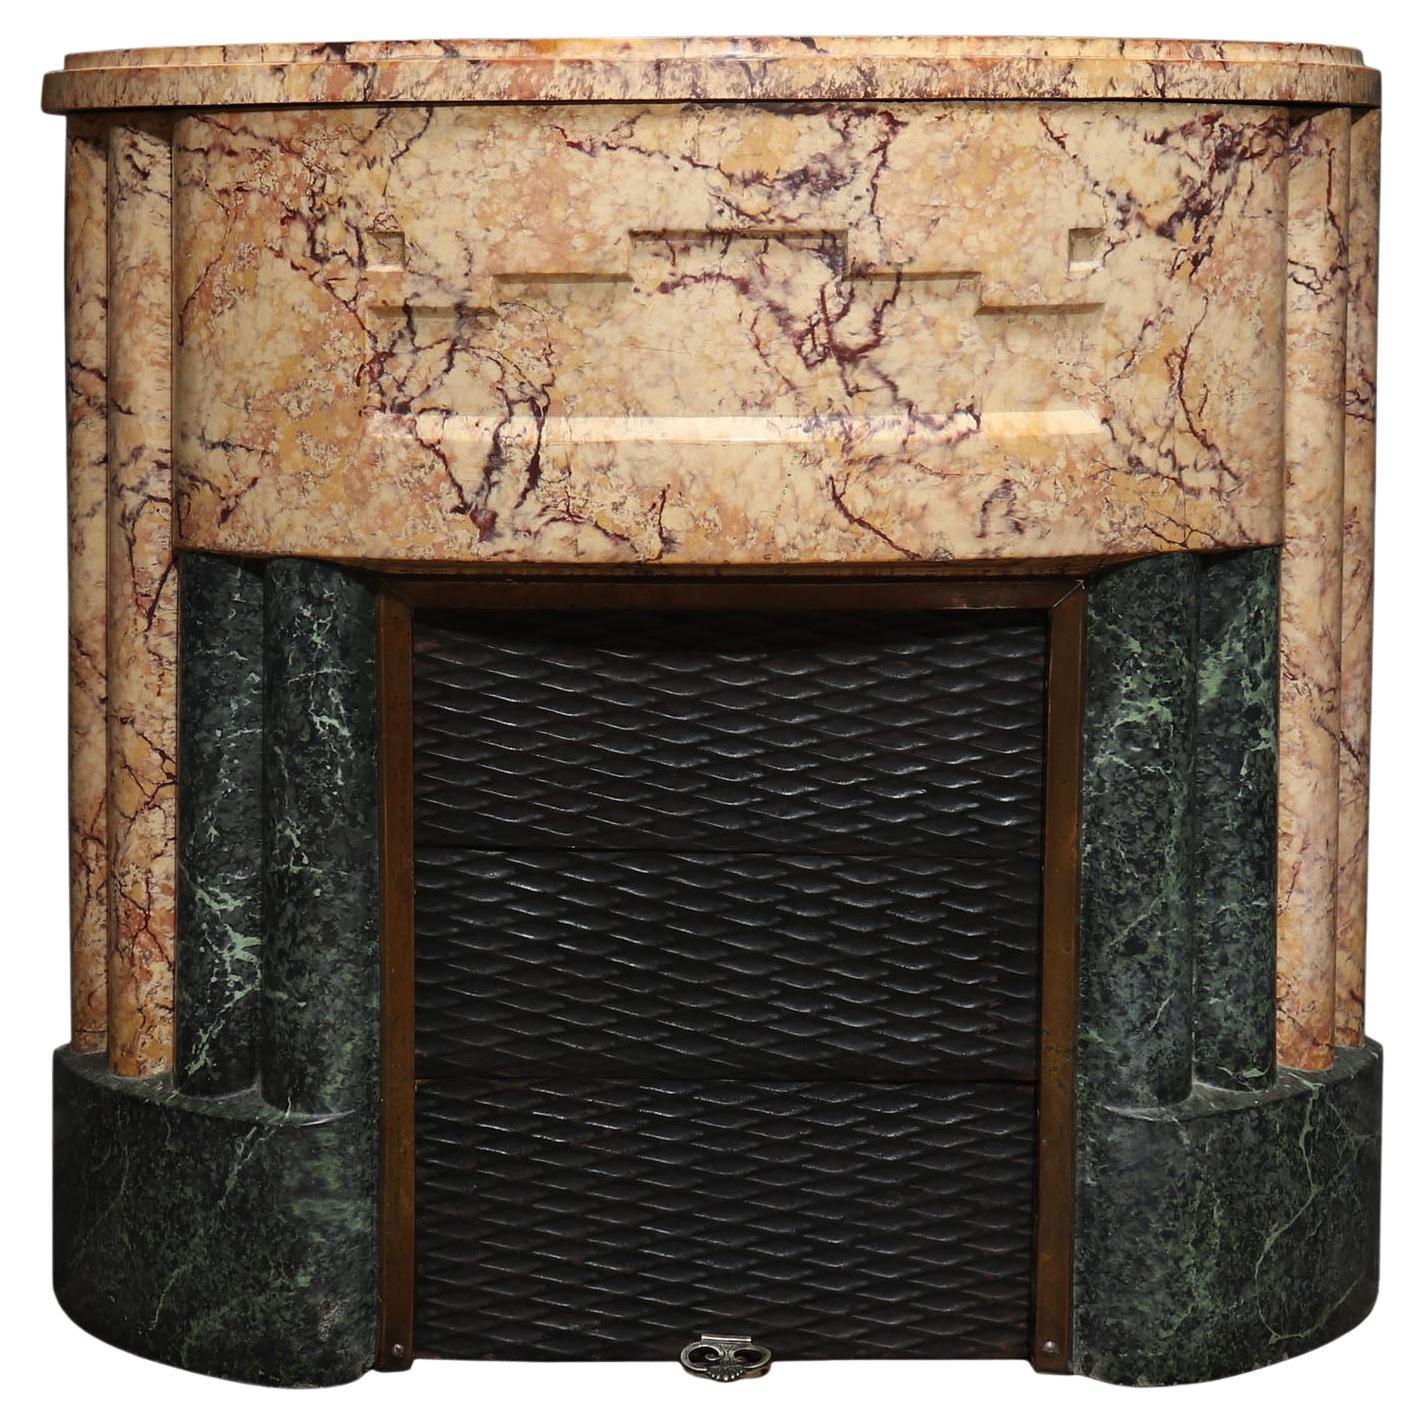 French Art Deco Fireplace For Sale